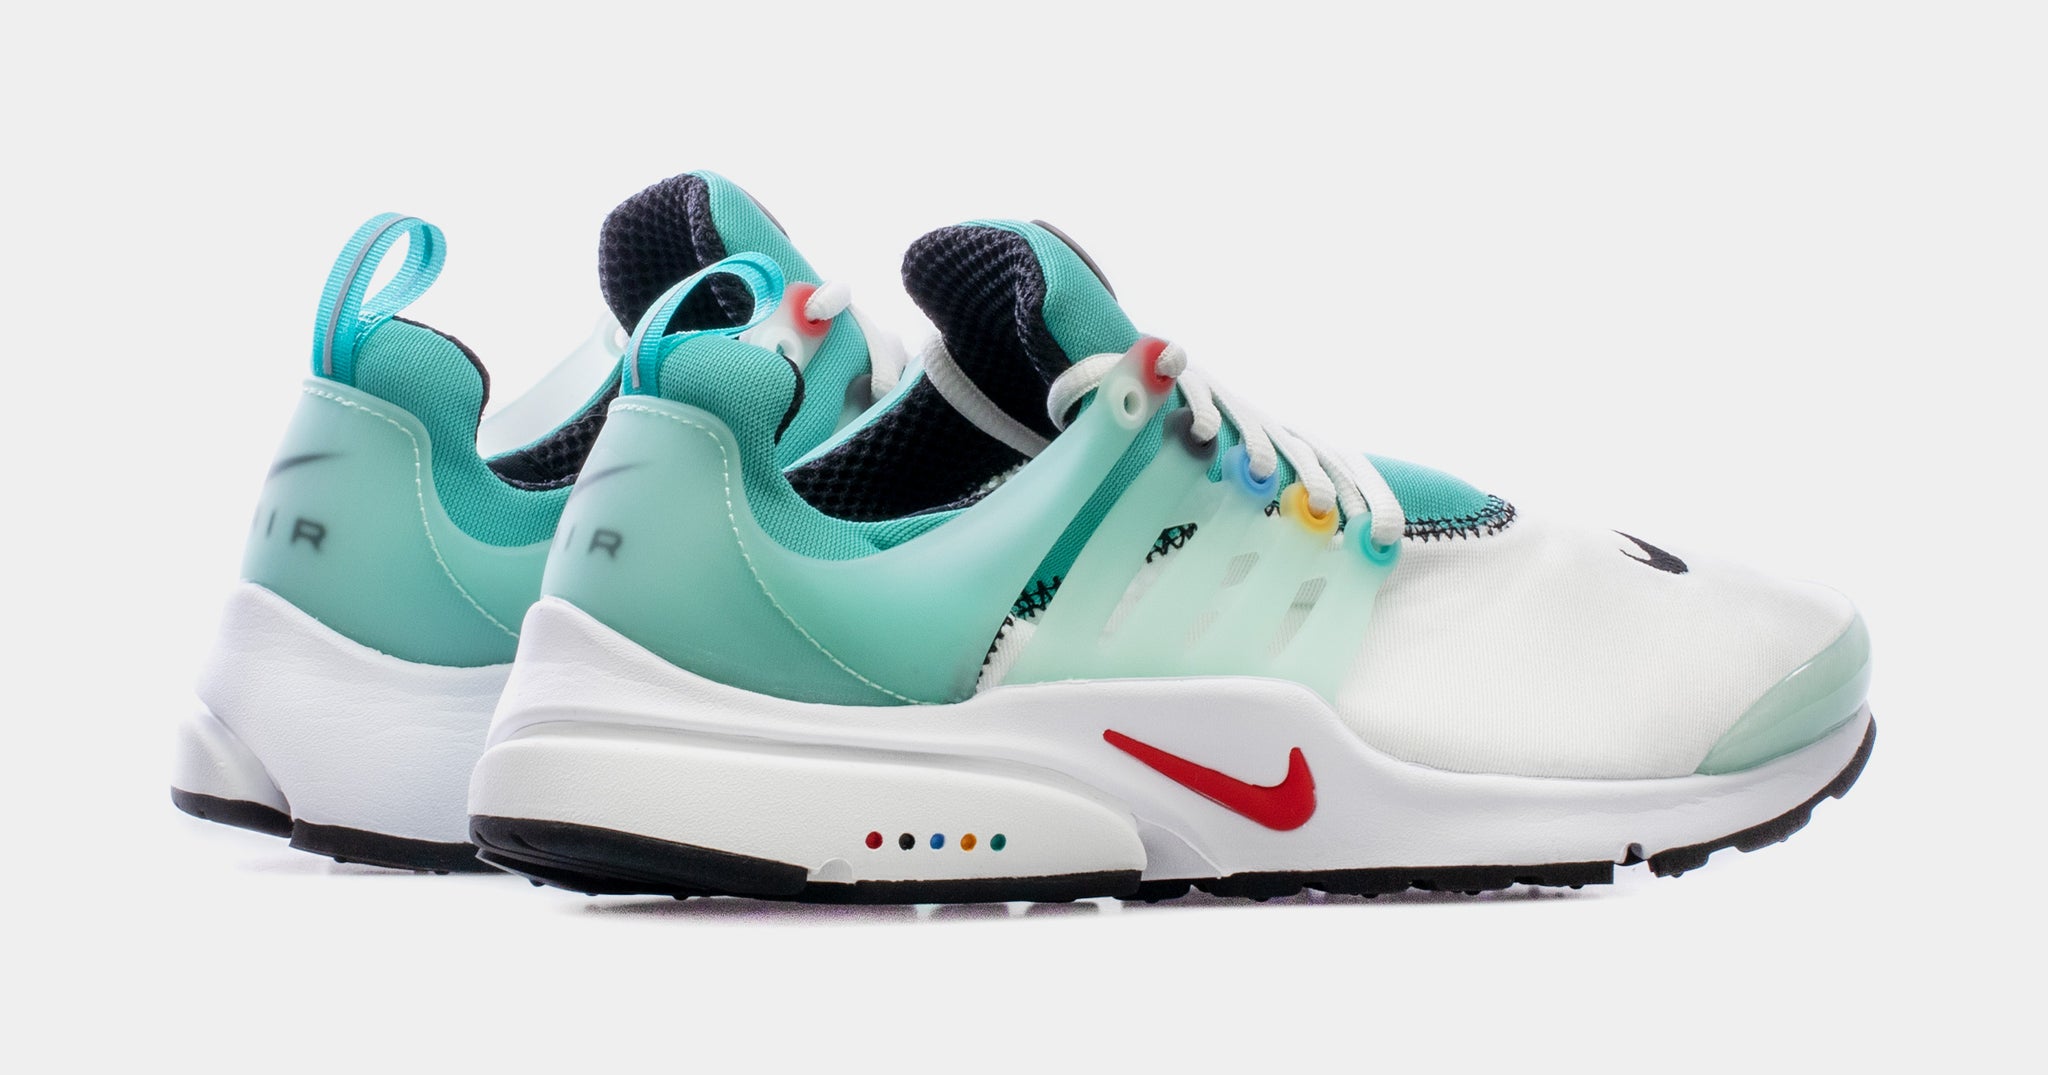 Nike Air Presto Stained Glass Mens Lifestyle Shoes Green Teal